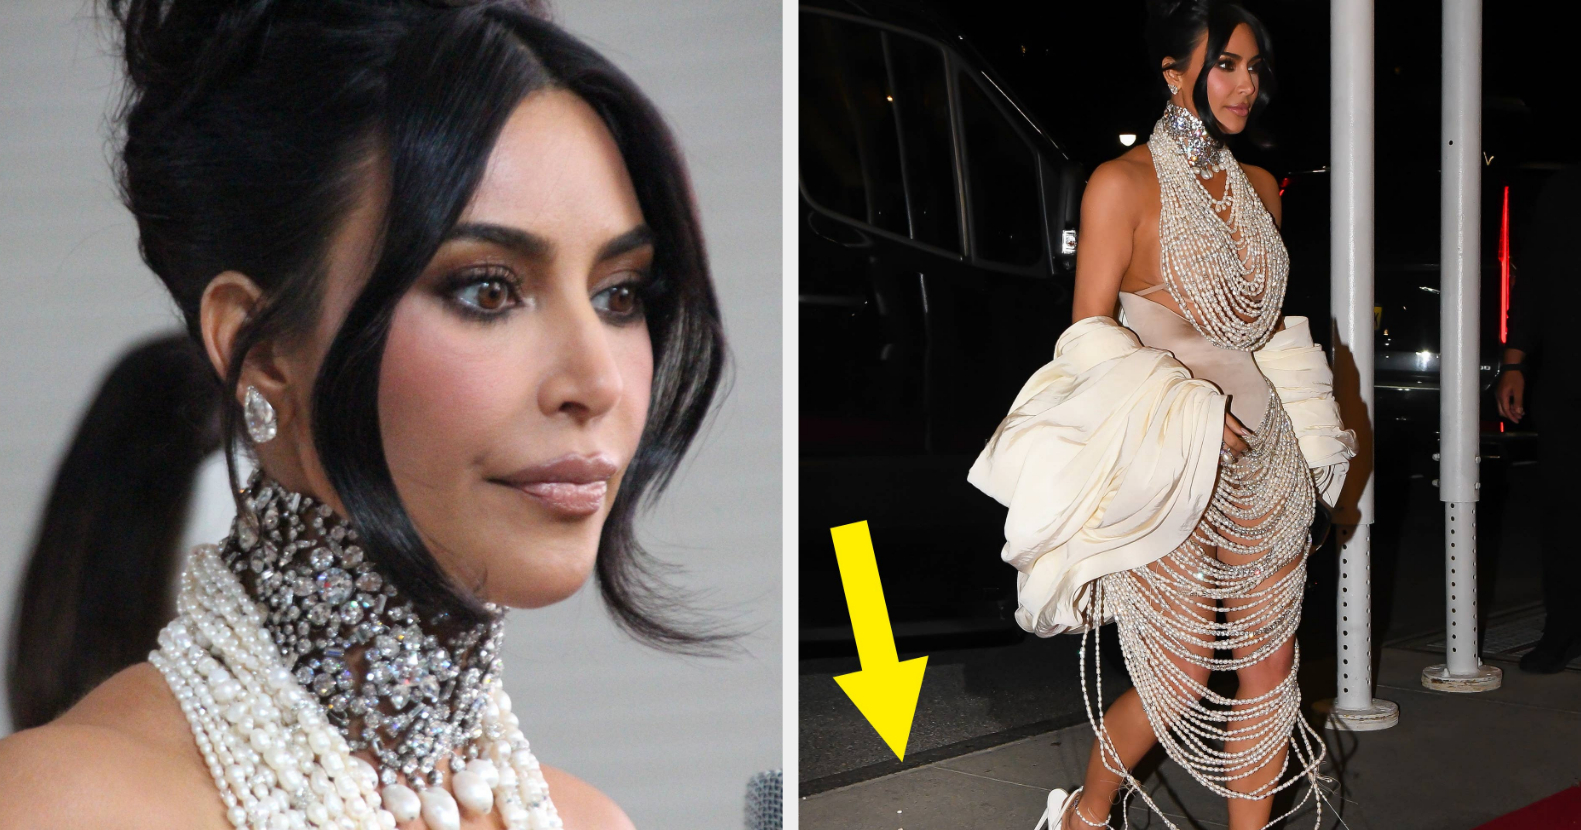 Here's Reportedly Why Kim Kardashian Covered Her Face at the Met Gala 2021